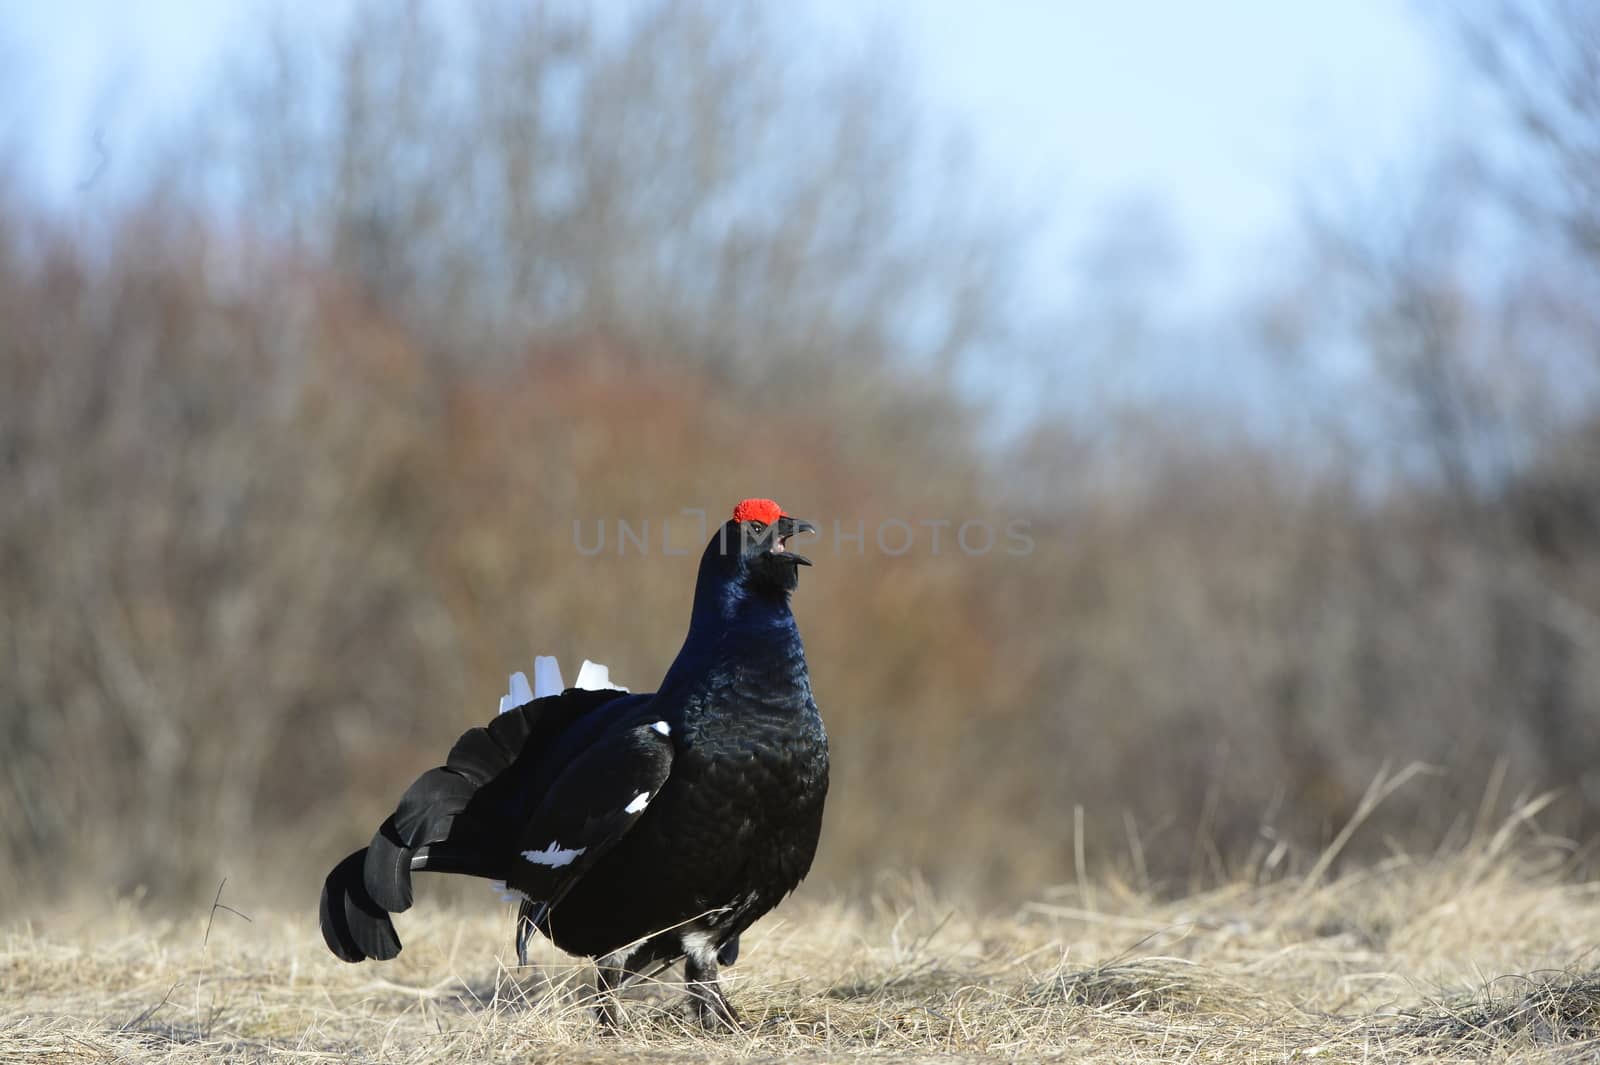 Lekking Black Grouse  by SURZ